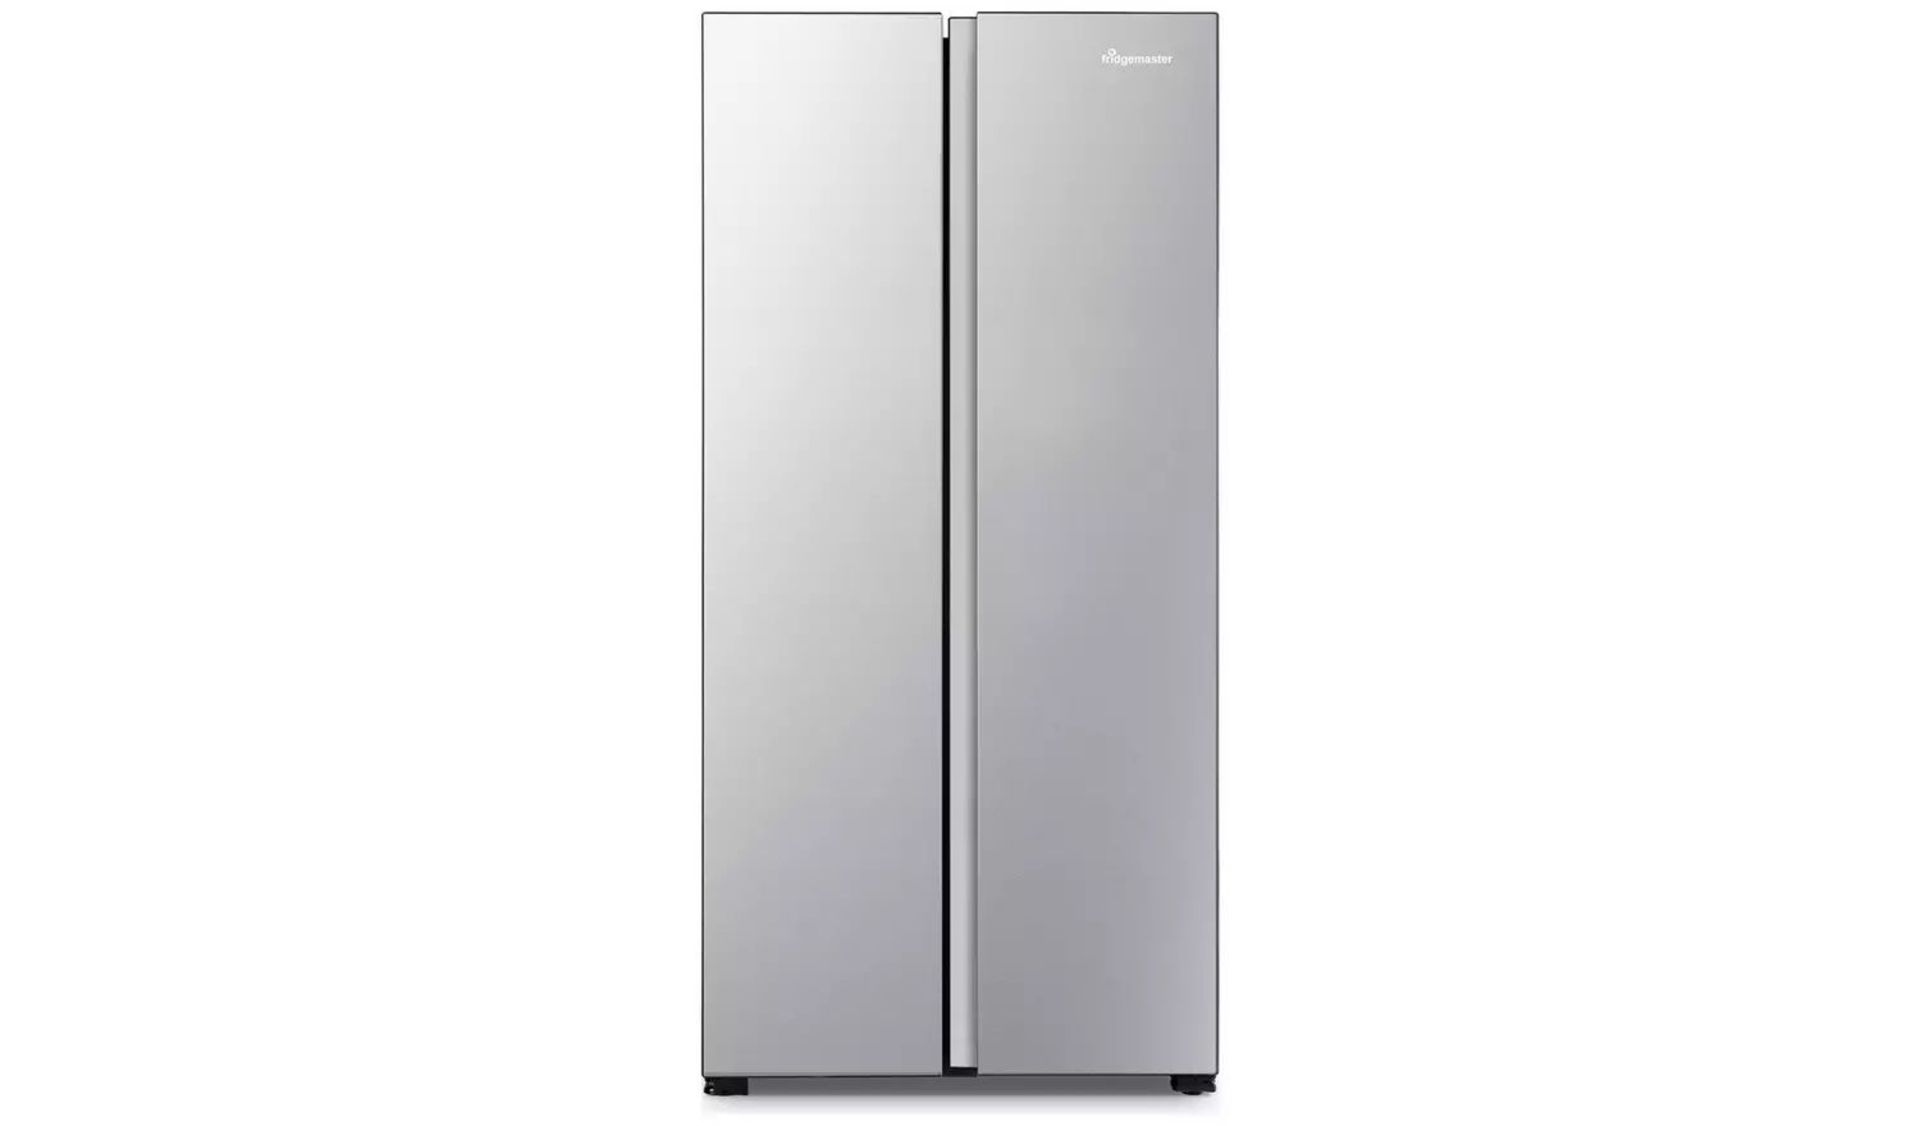 Fridgemaster MS83430ES American Fridge Freezer - Silver. - RRP £850.00. Packed with feature and an